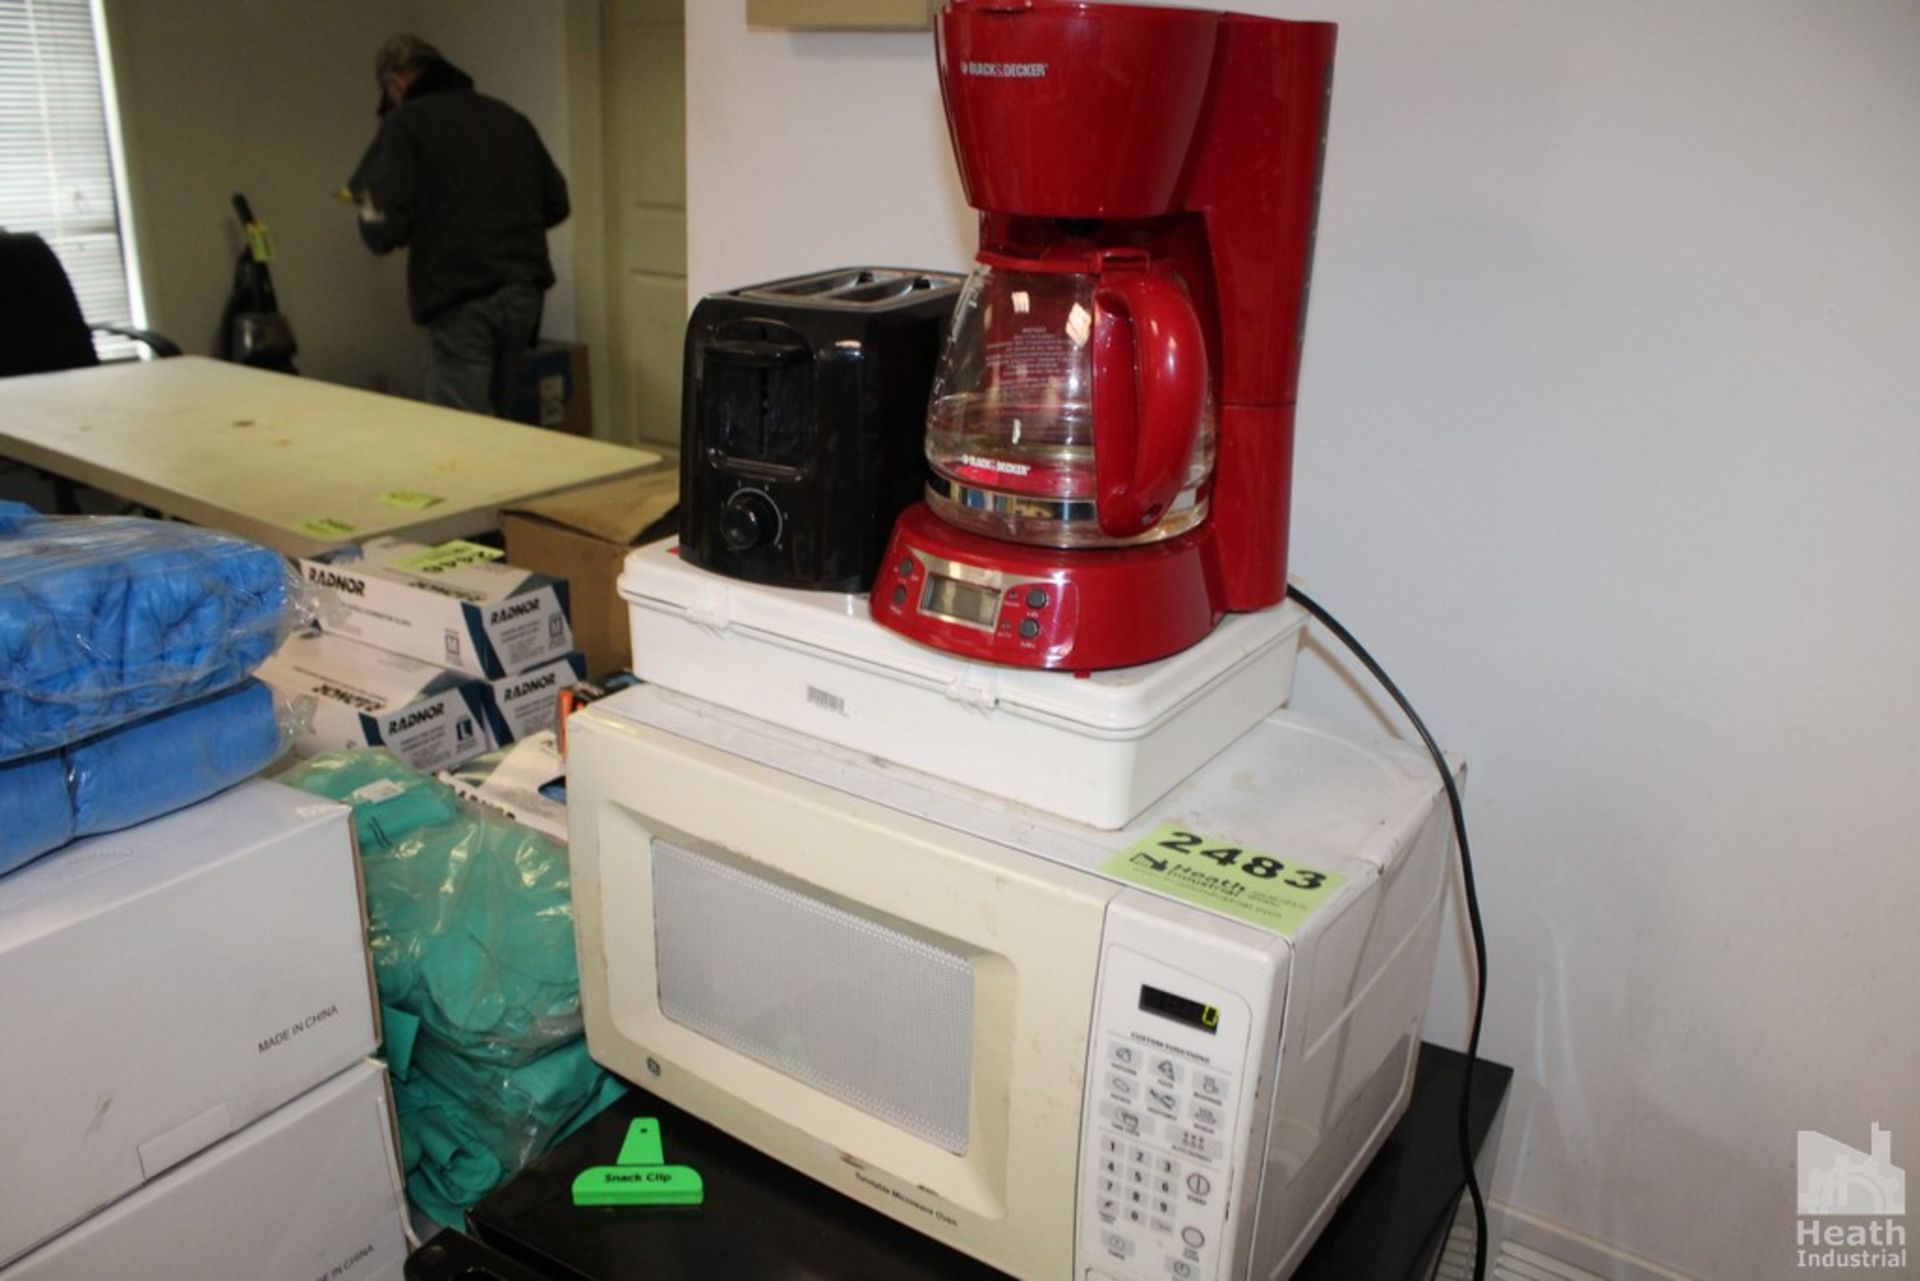 GE MICROWAVE, BLACK & DECKER COFFEE MAKER AND TOASTMASTER TOASTER